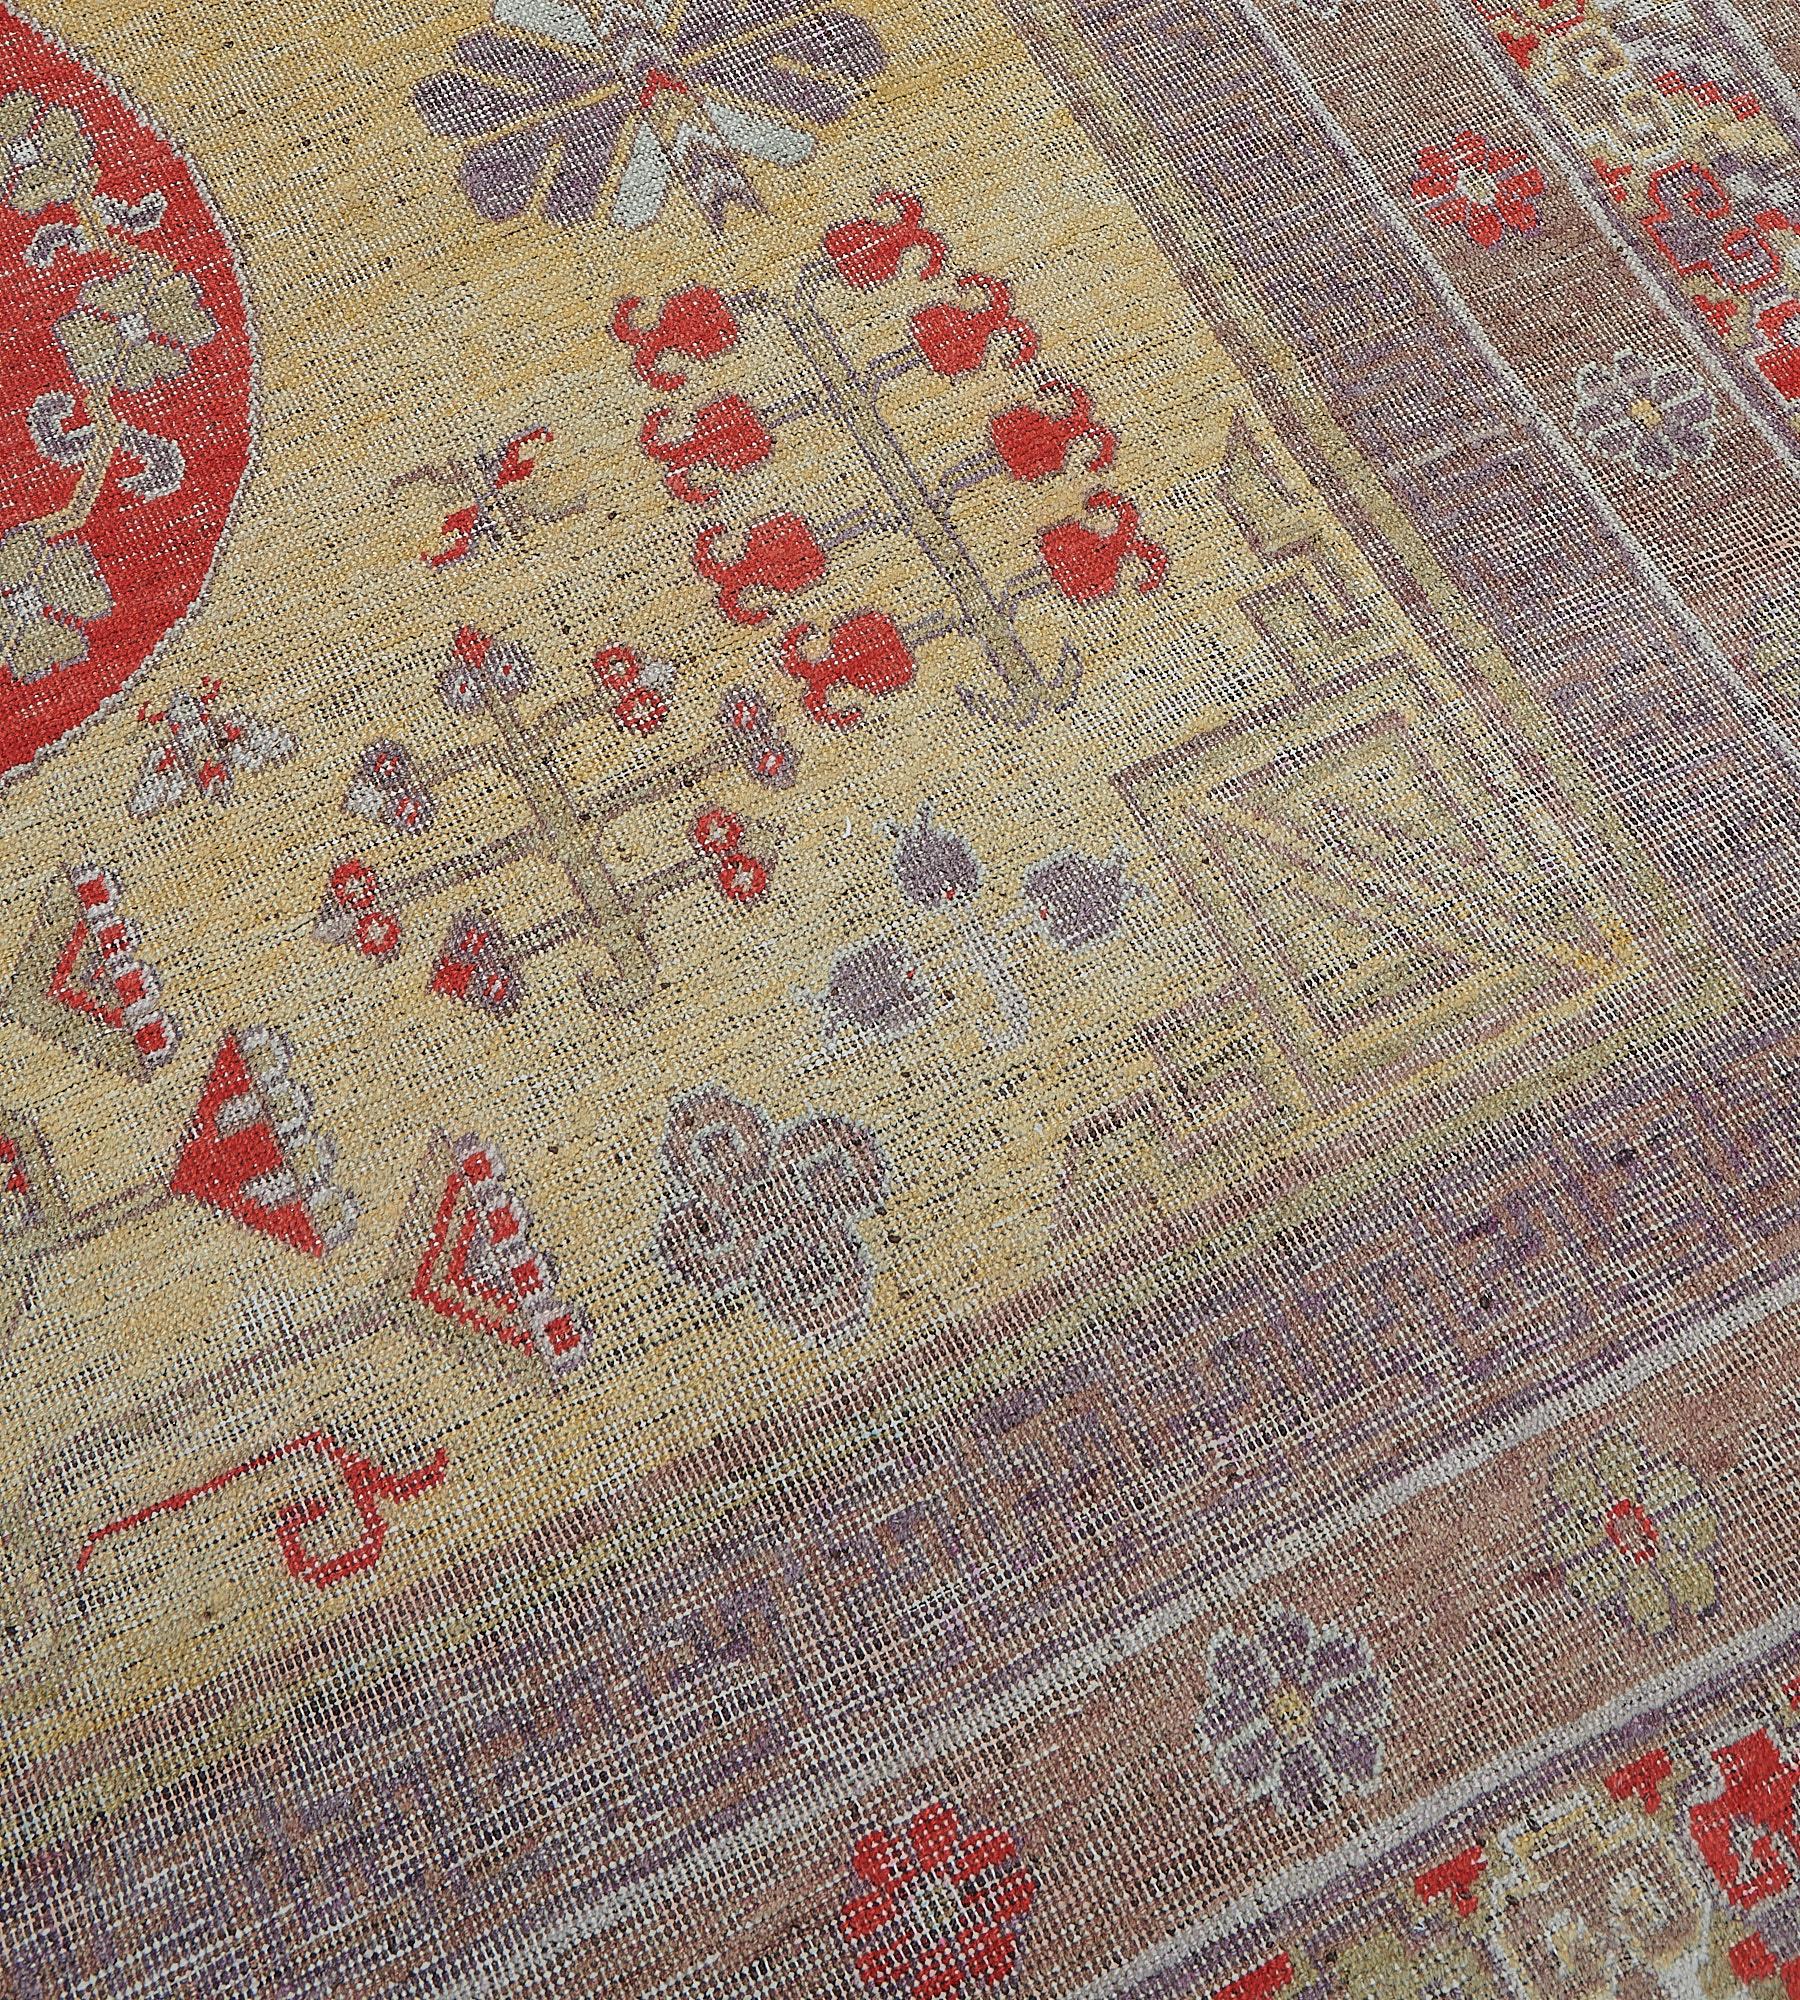 Antique Circa 1880 Hand-knotted Wool Khotan Rug In Good Condition For Sale In West Hollywood, CA